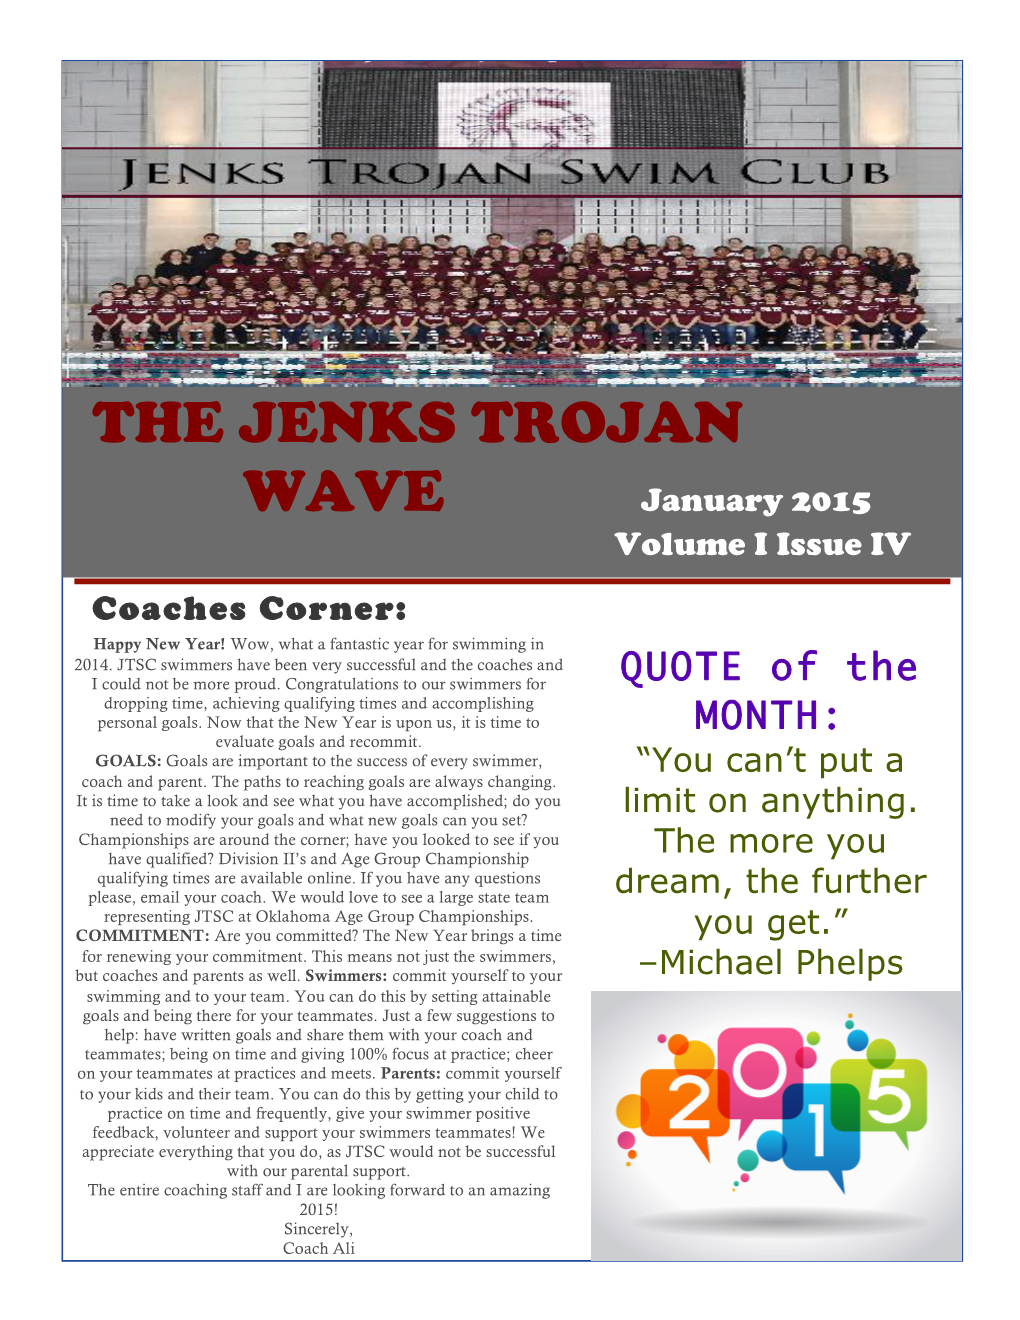 THE JENKS TROJAN WAVE January 2015 Volume I Issue IV Coaches Corner: Happy New Year! Wow, What a Fantastic Year for Swimming in 2014